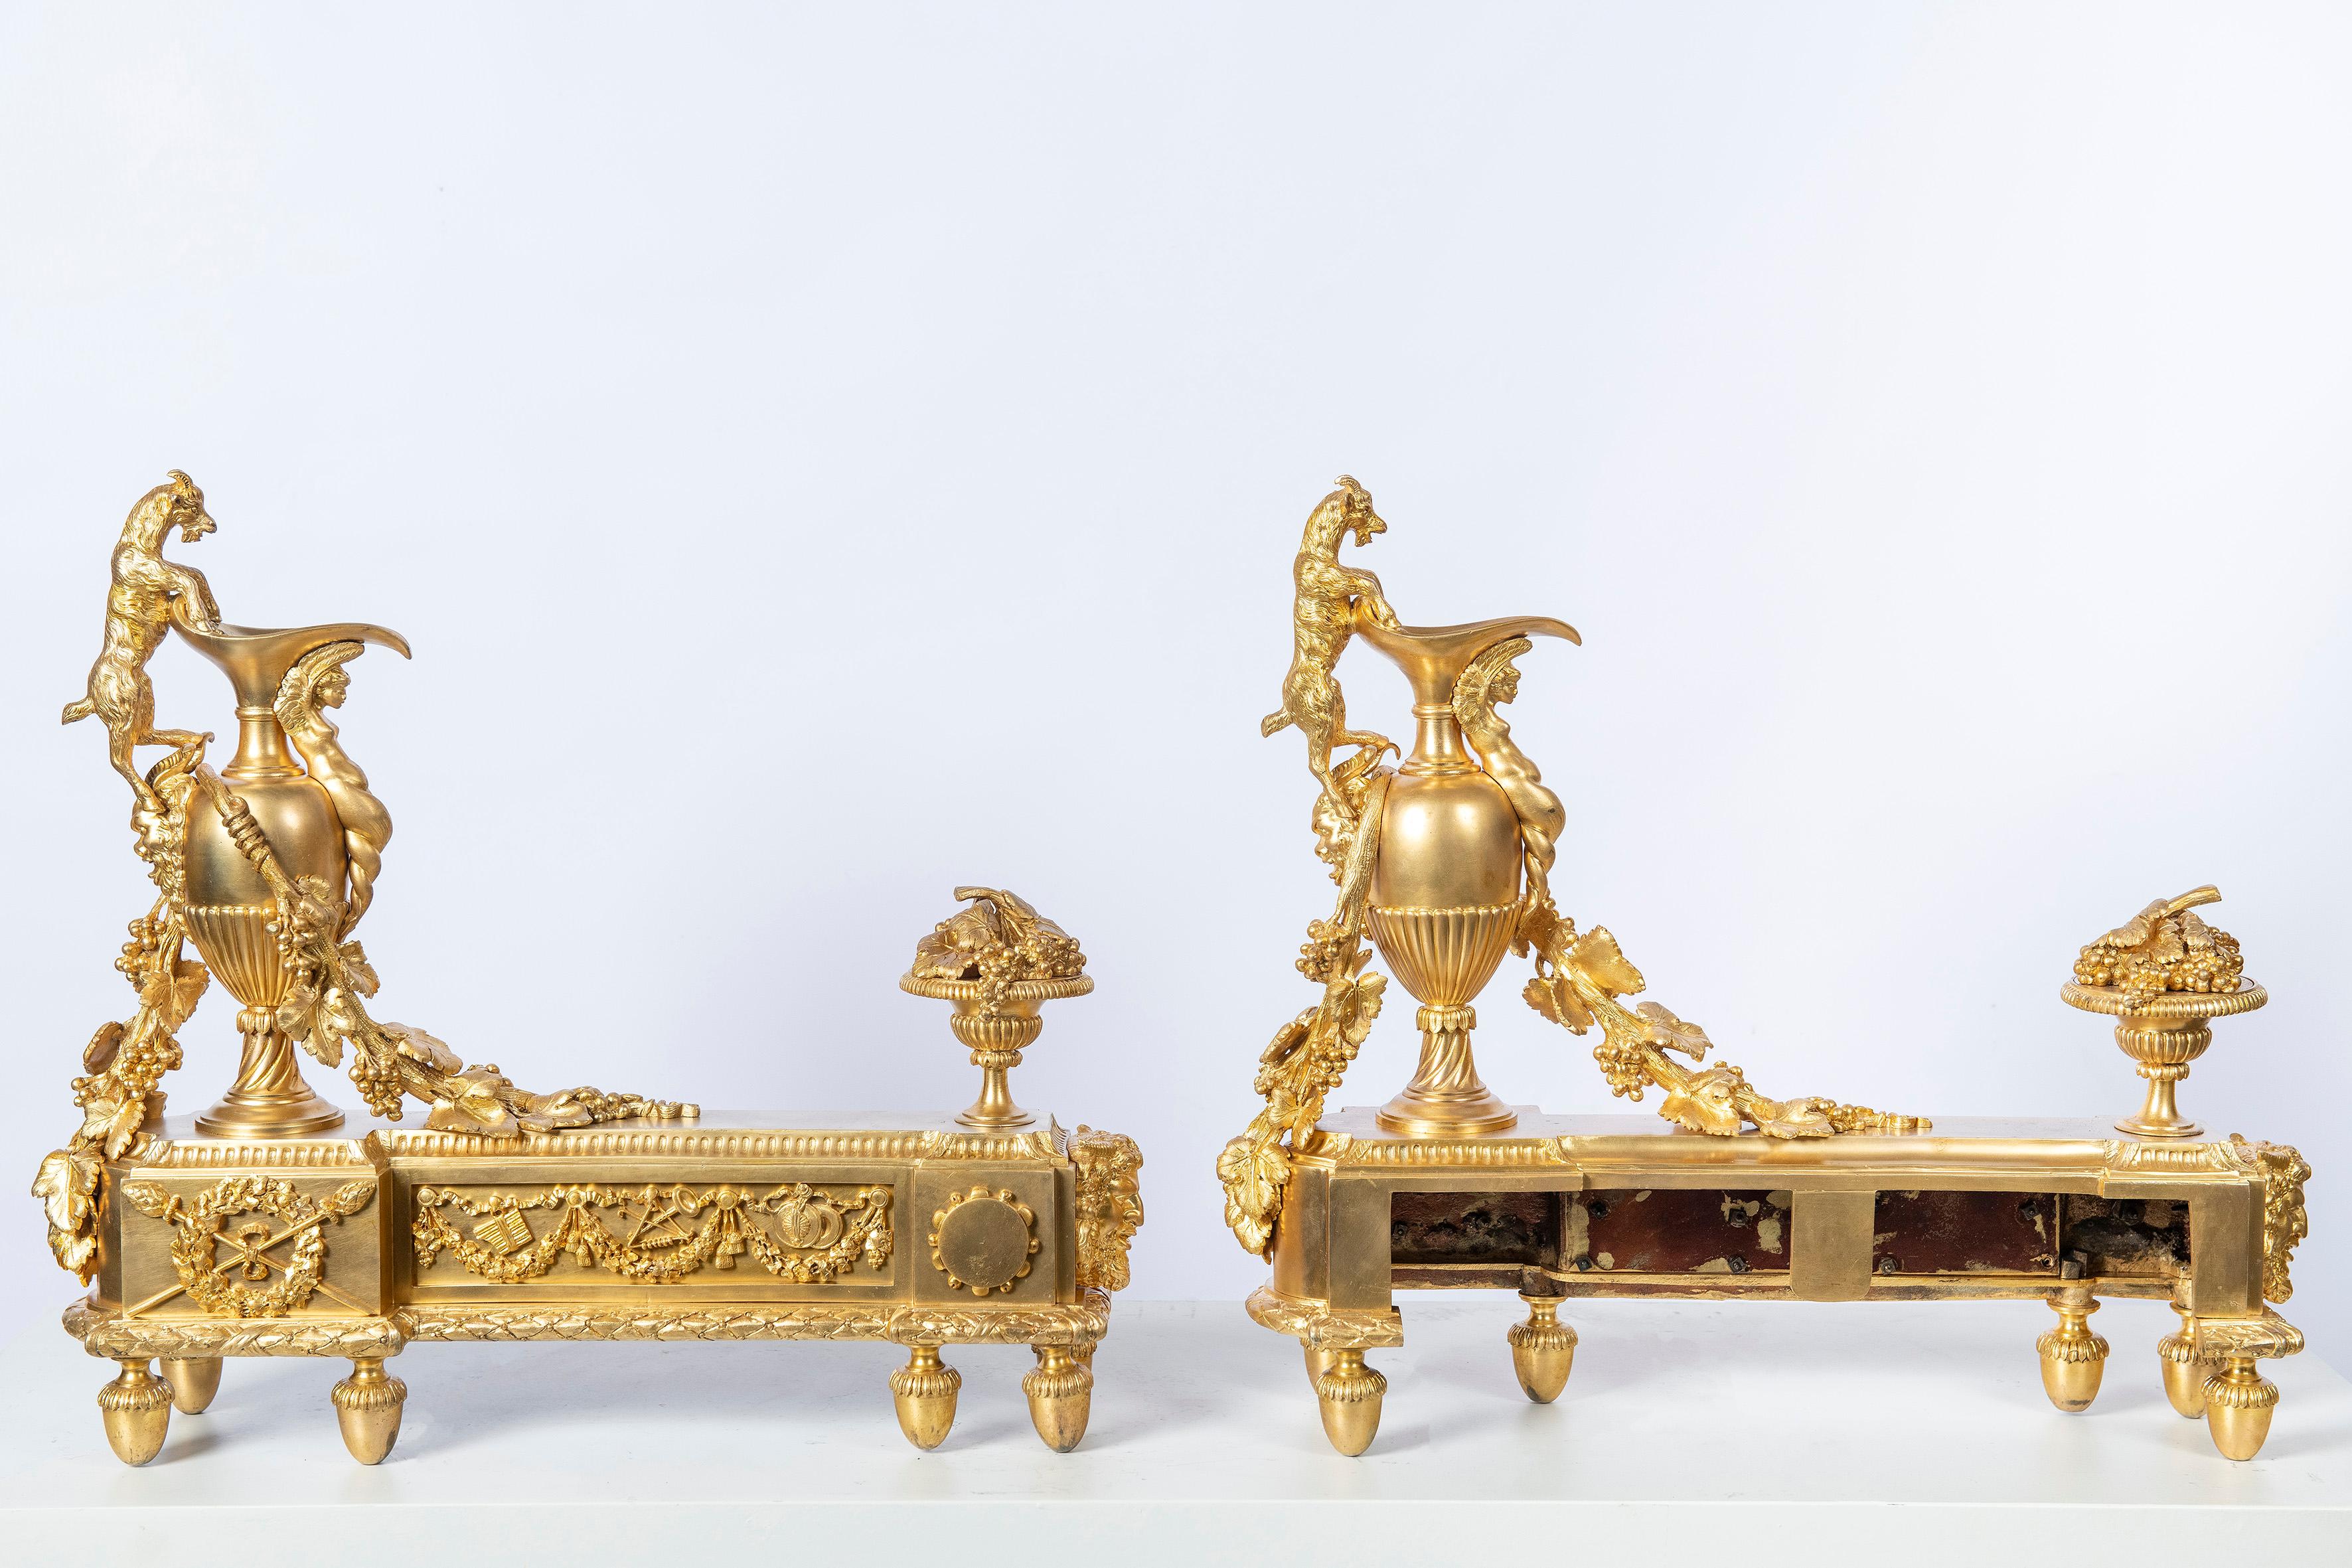 Pair of gilt bronze andirons signed E. Mottheu, France, late 19th century.